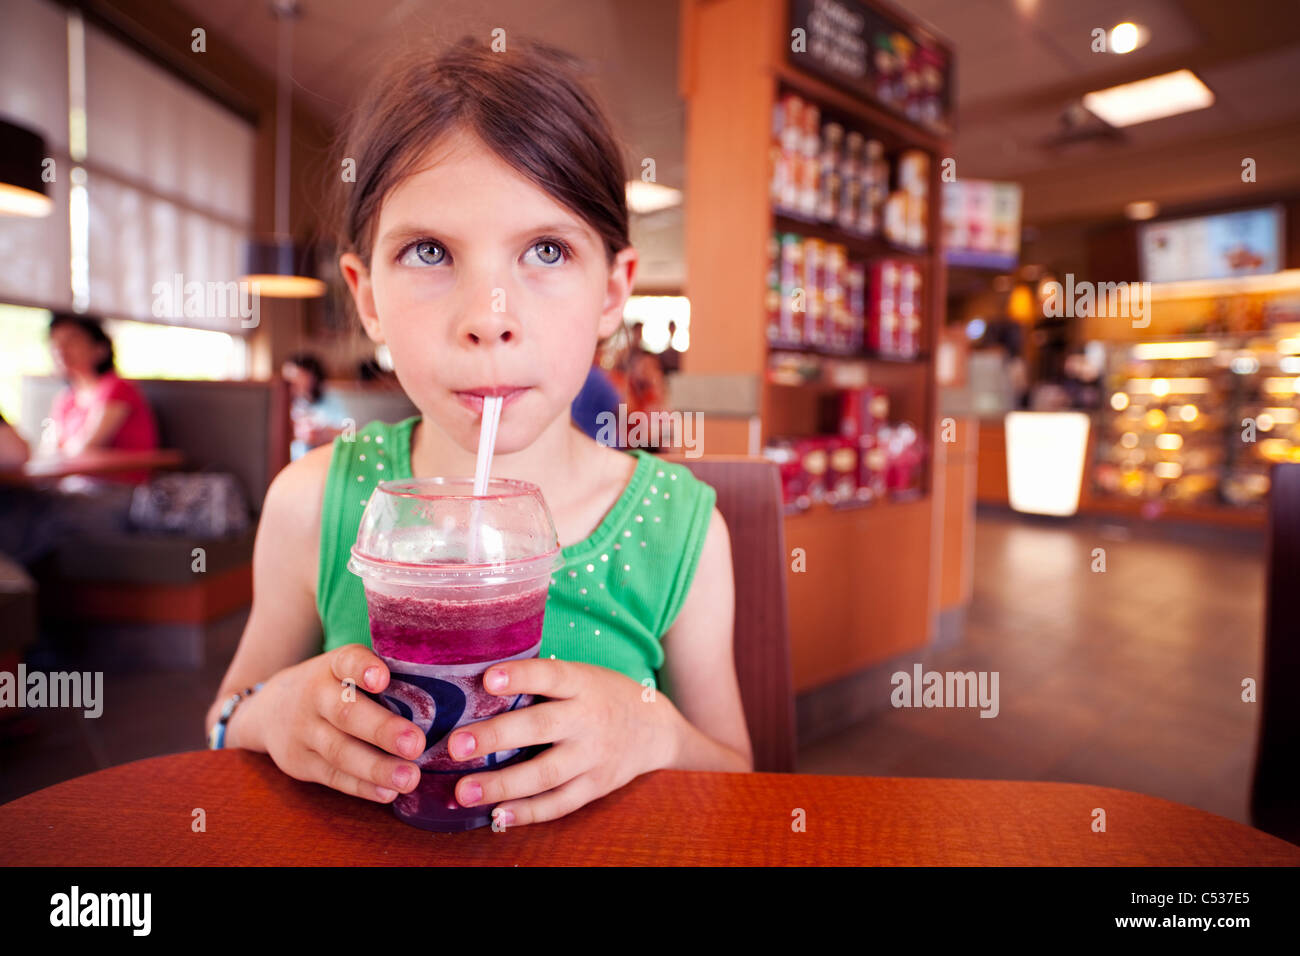 girl drinking smoothie in coffee shop Stock Photo